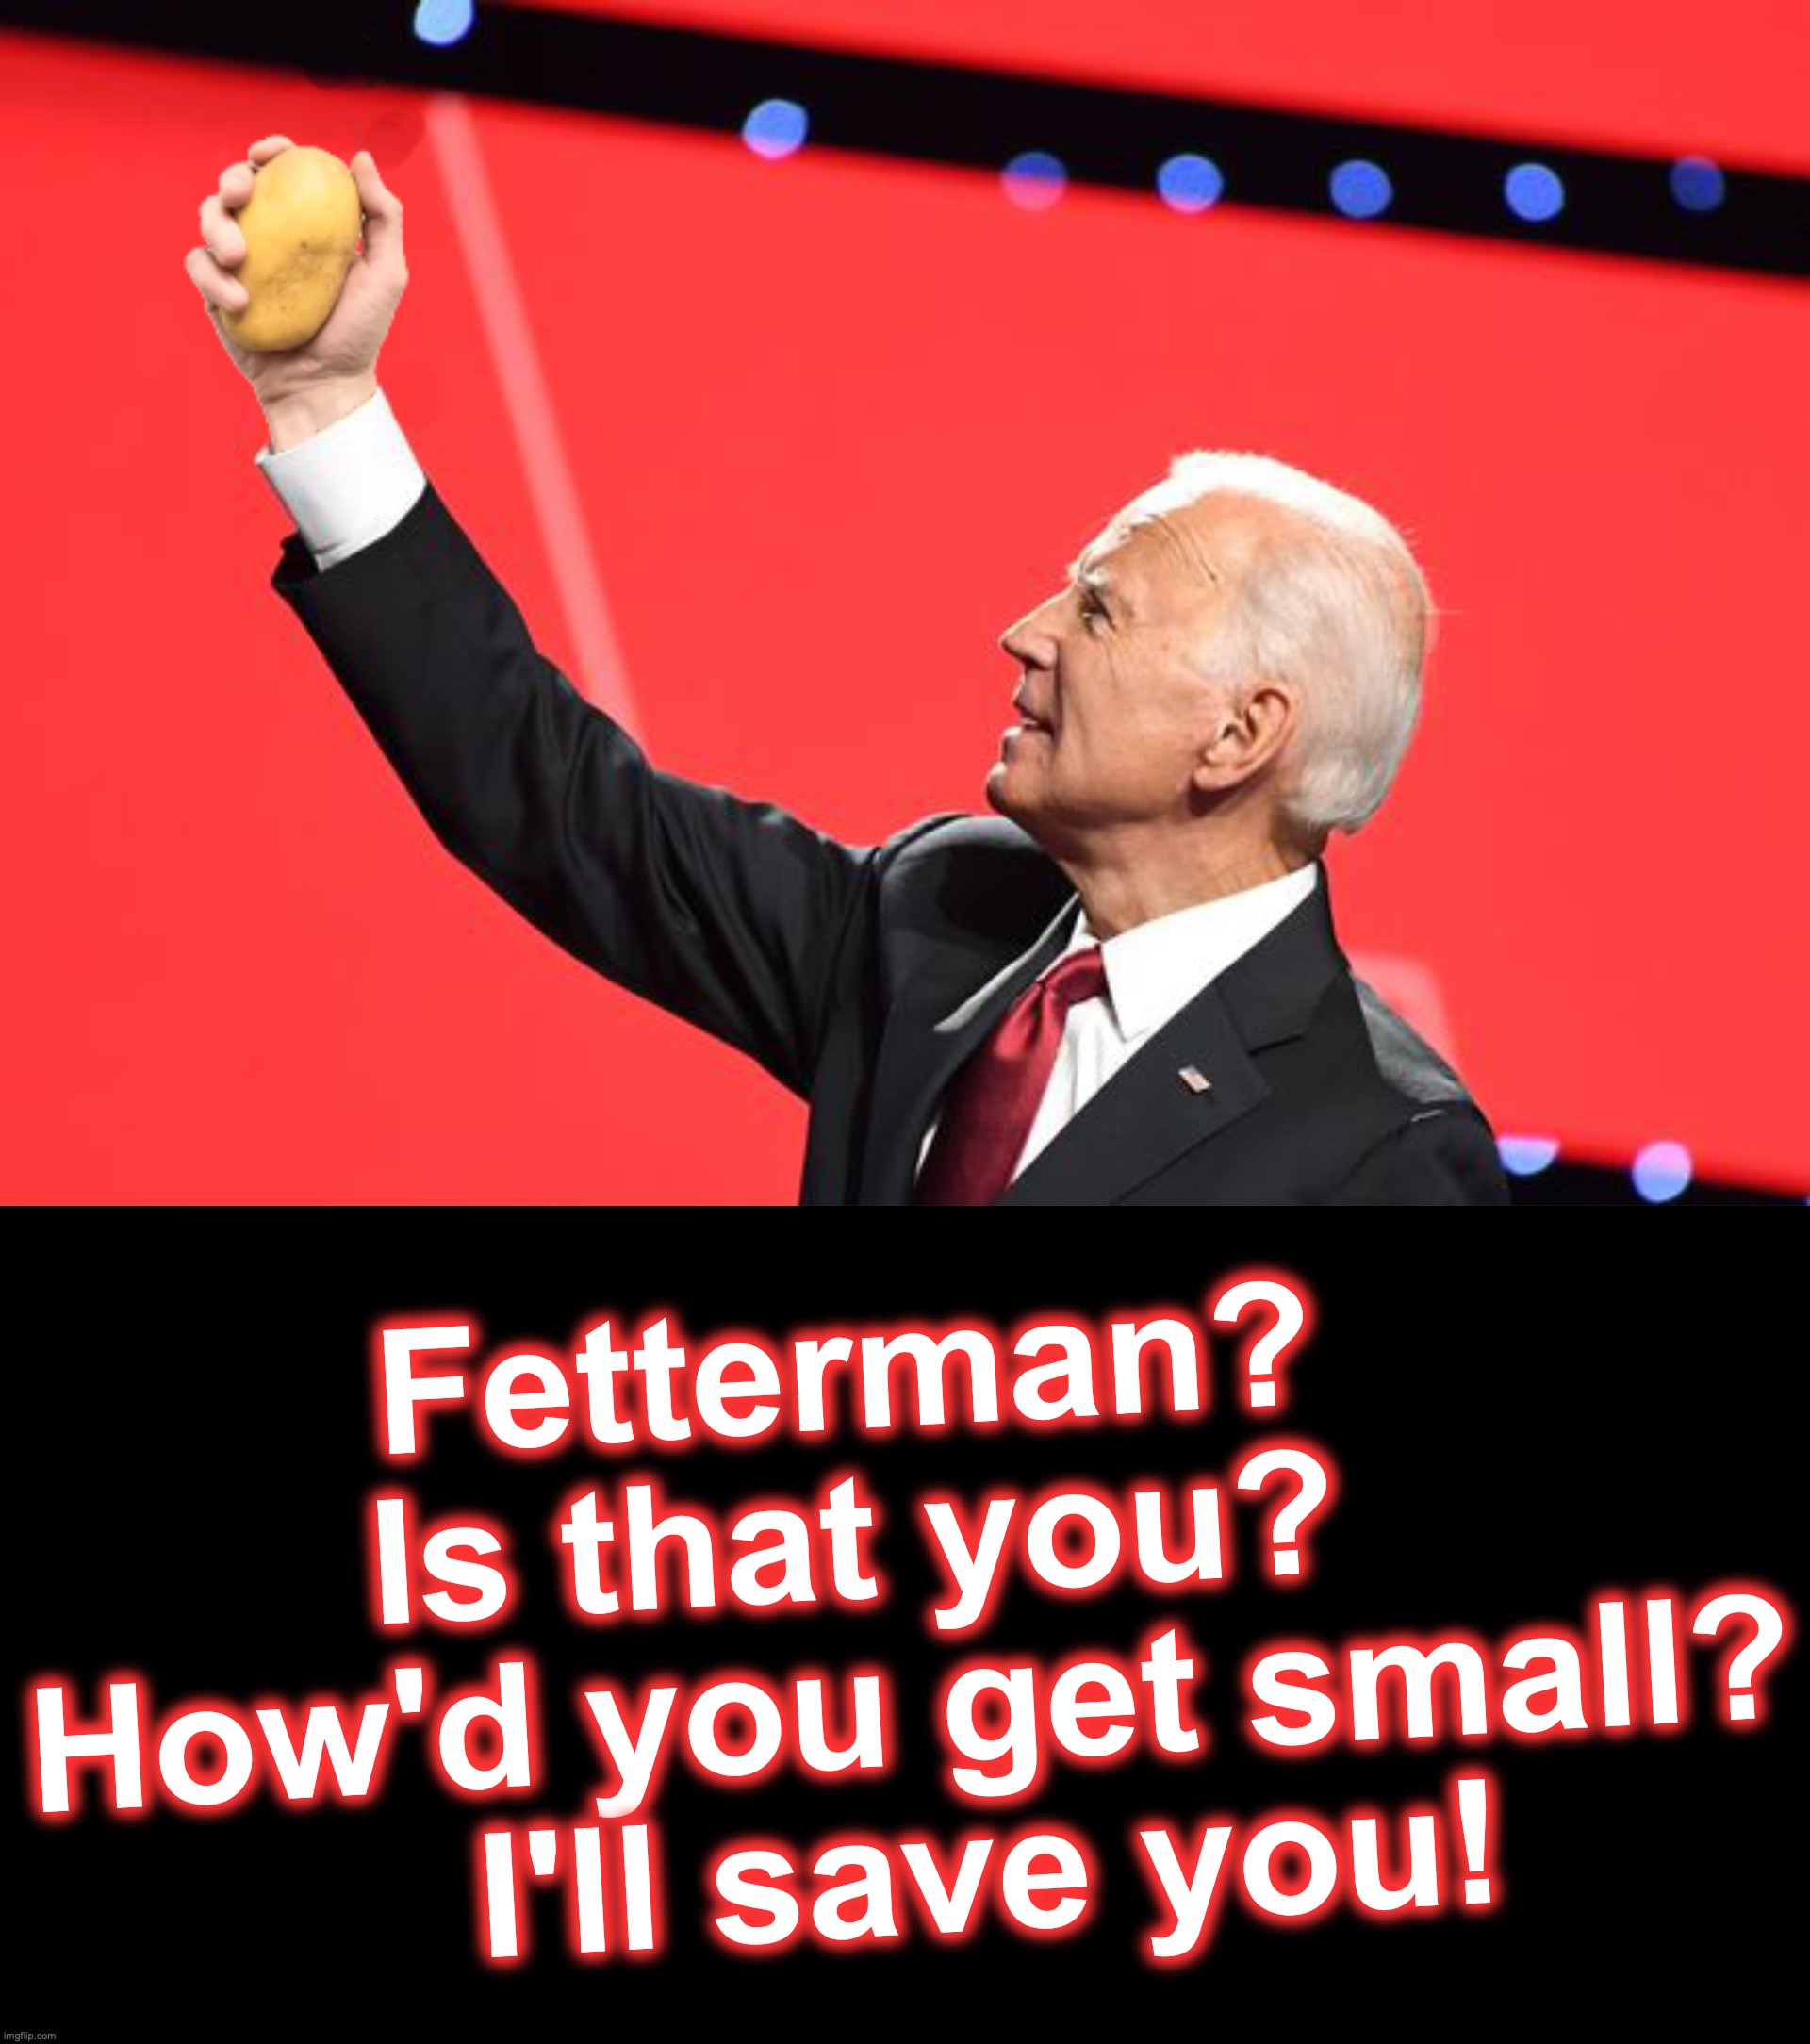 Fetterman?   Is that you?   How'd you get small?
   I'll save you! | image tagged in potato biden,black box,ConservativeMemes | made w/ Imgflip meme maker